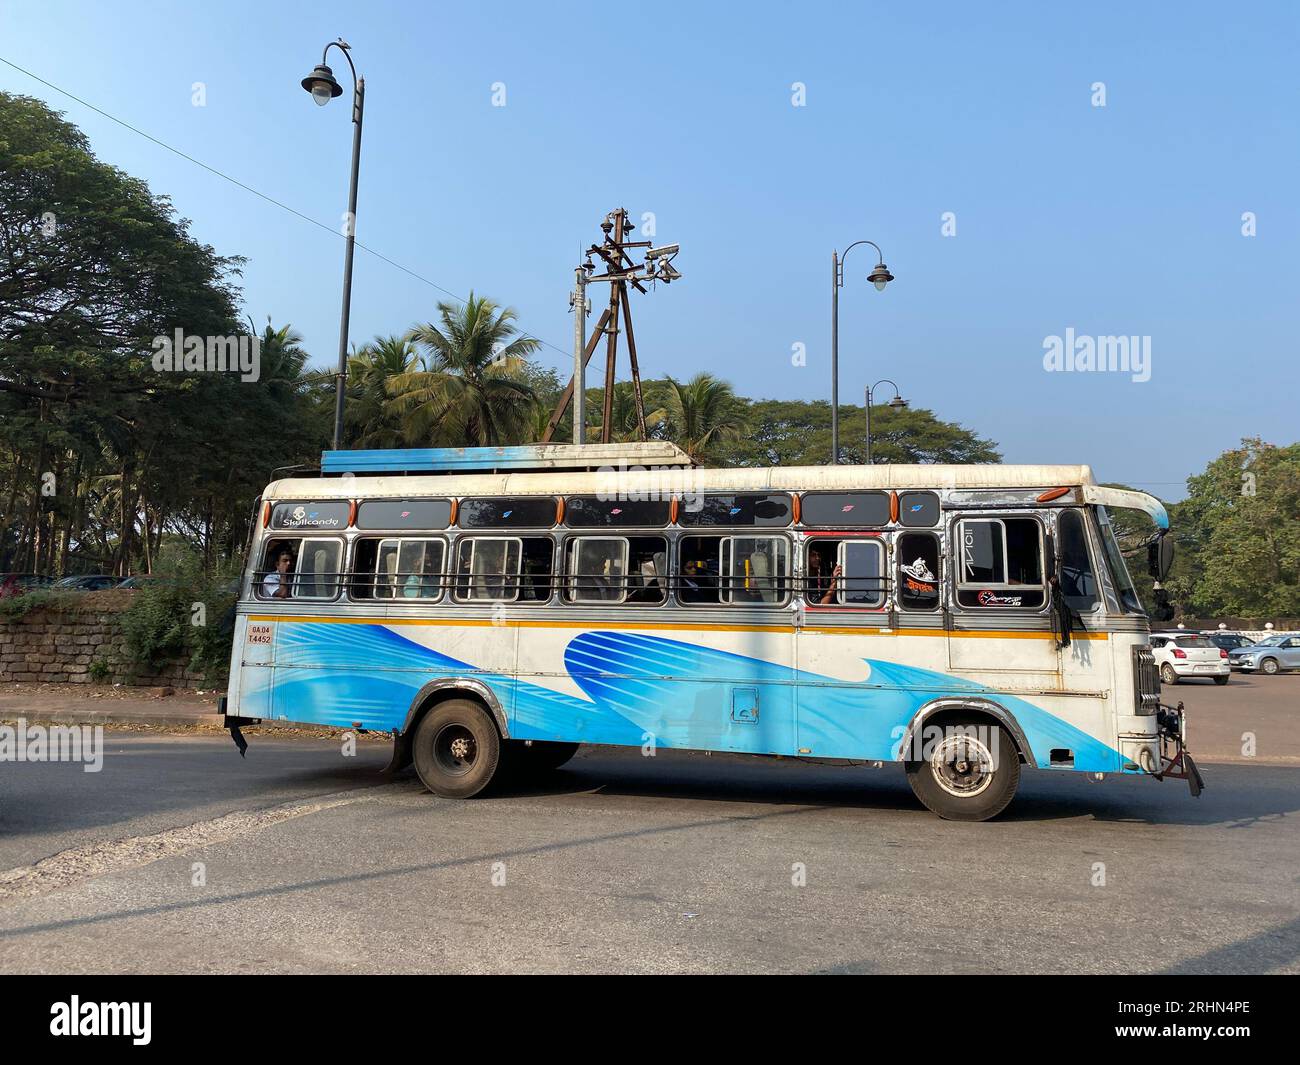 Old Goa, Goa, India - January 2023: A Goa State Transport bus transporting passengers on a street in Old Goa. Stock Photo